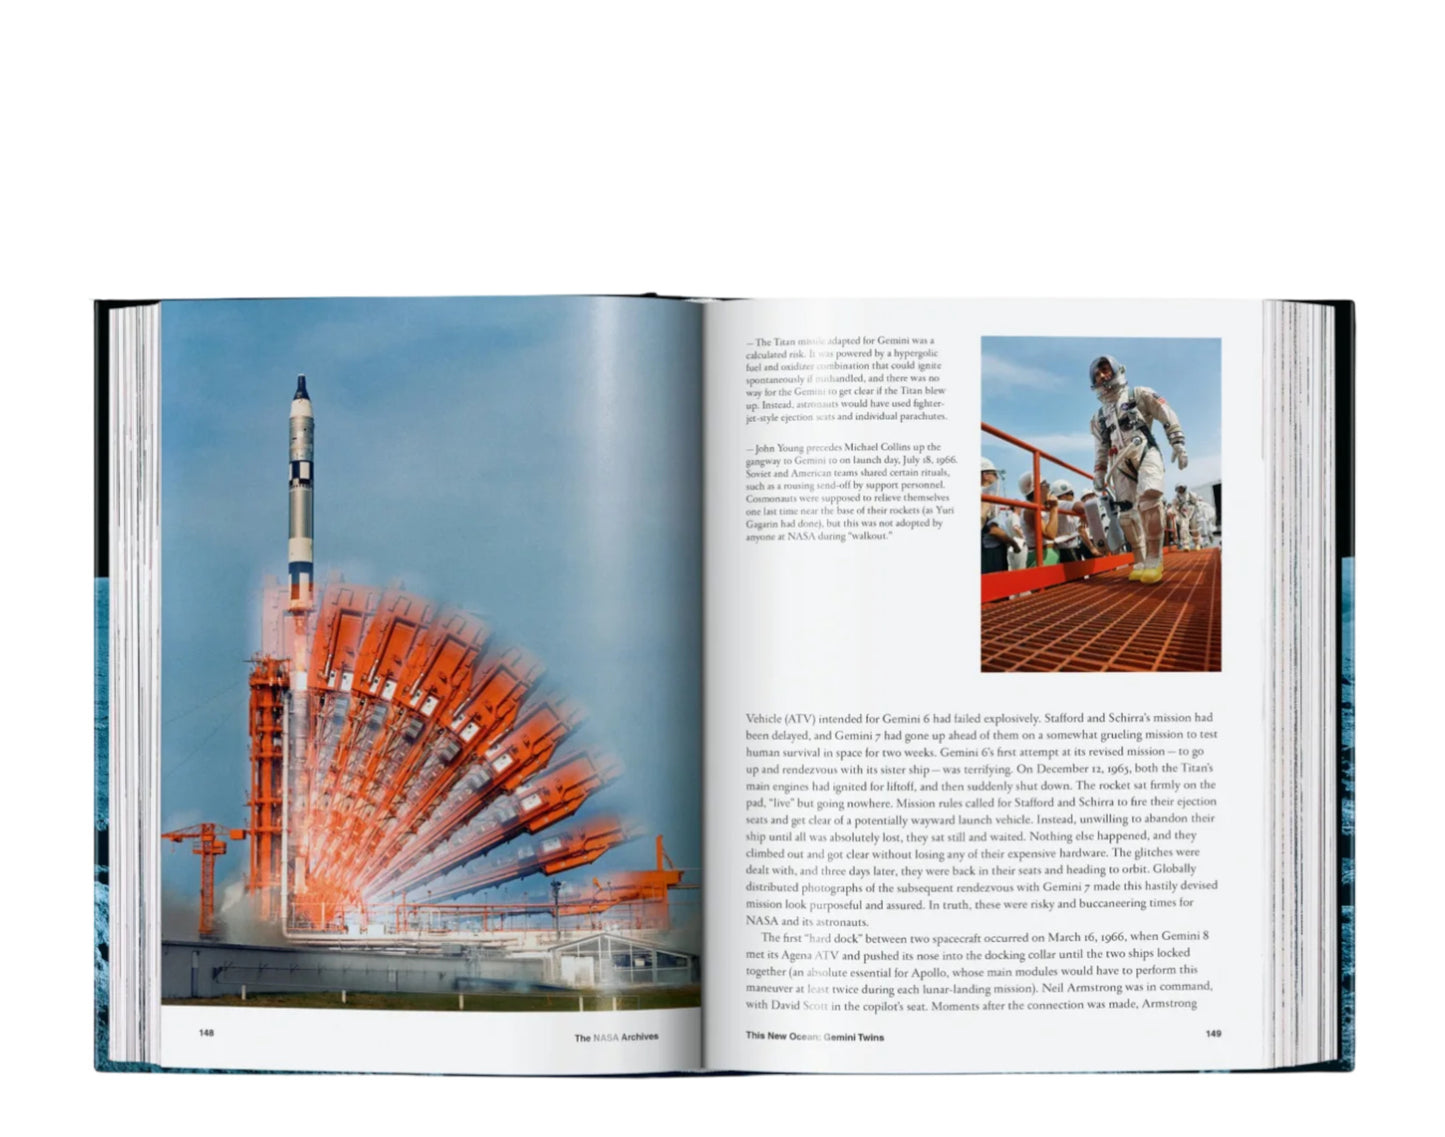 Taschen Books - The NASA Archives. 40th Anniversary Edition Hardcover Book